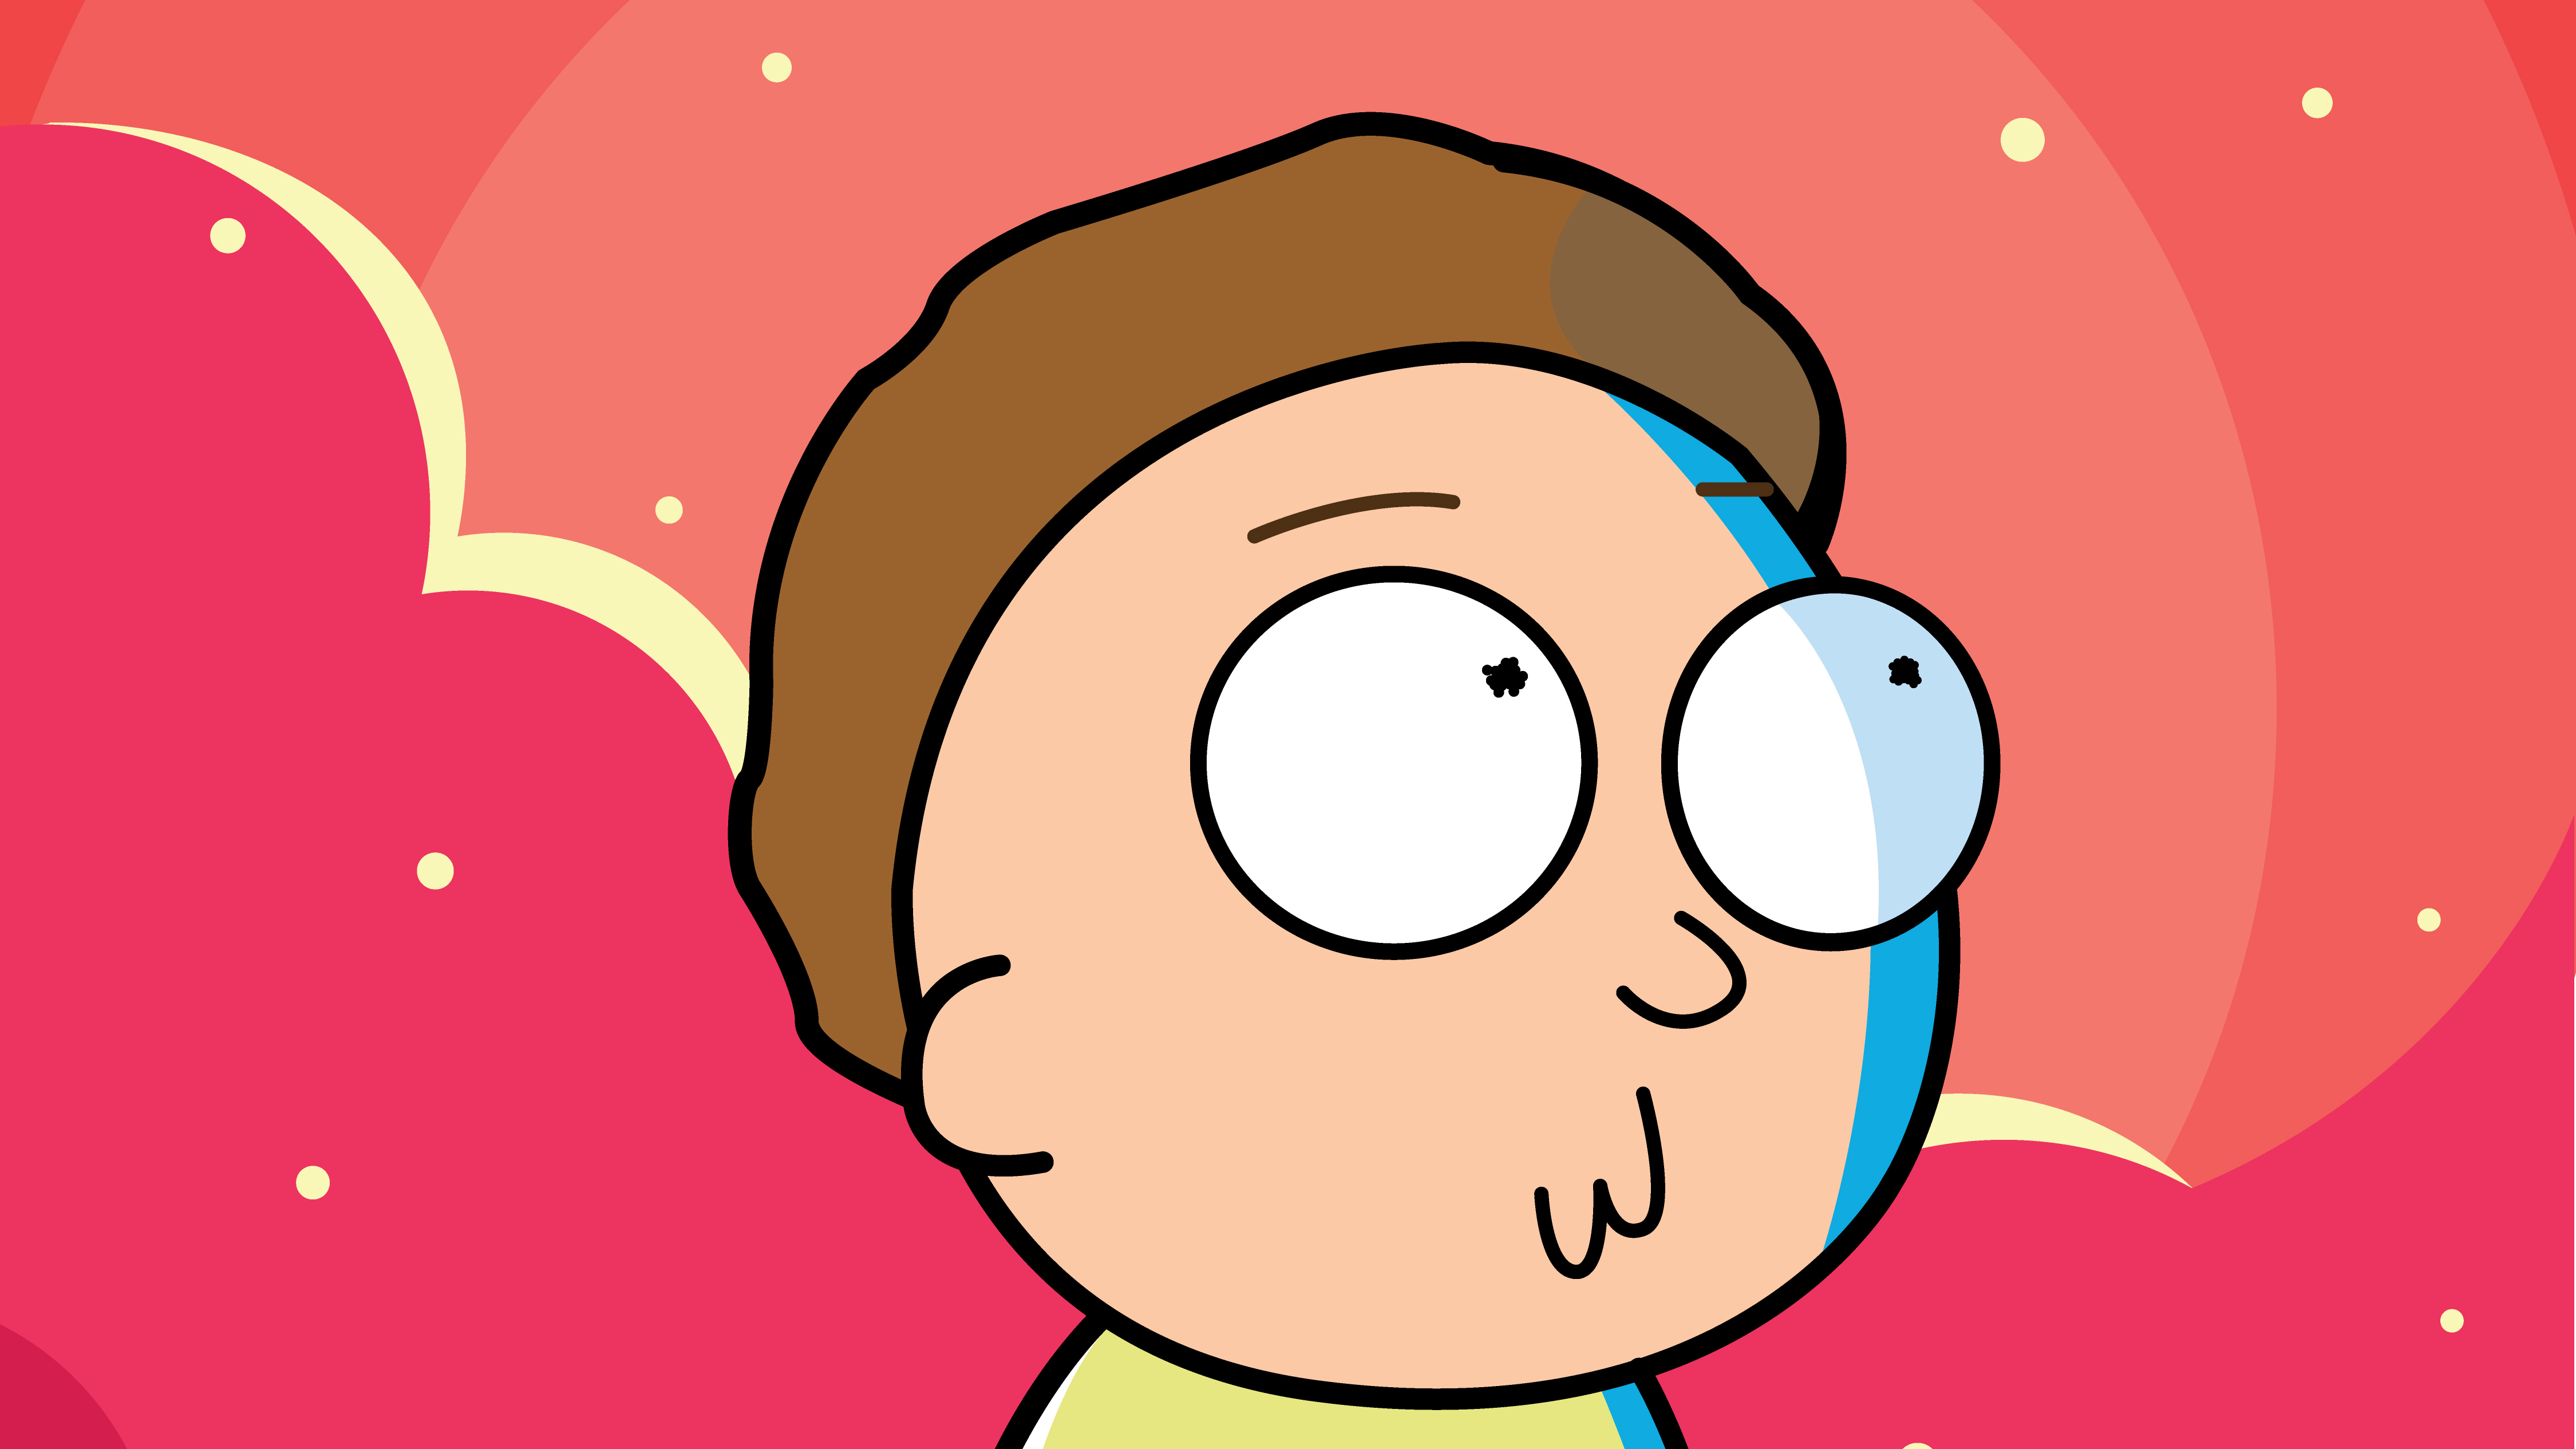 rick and morty, tv show, morty smith